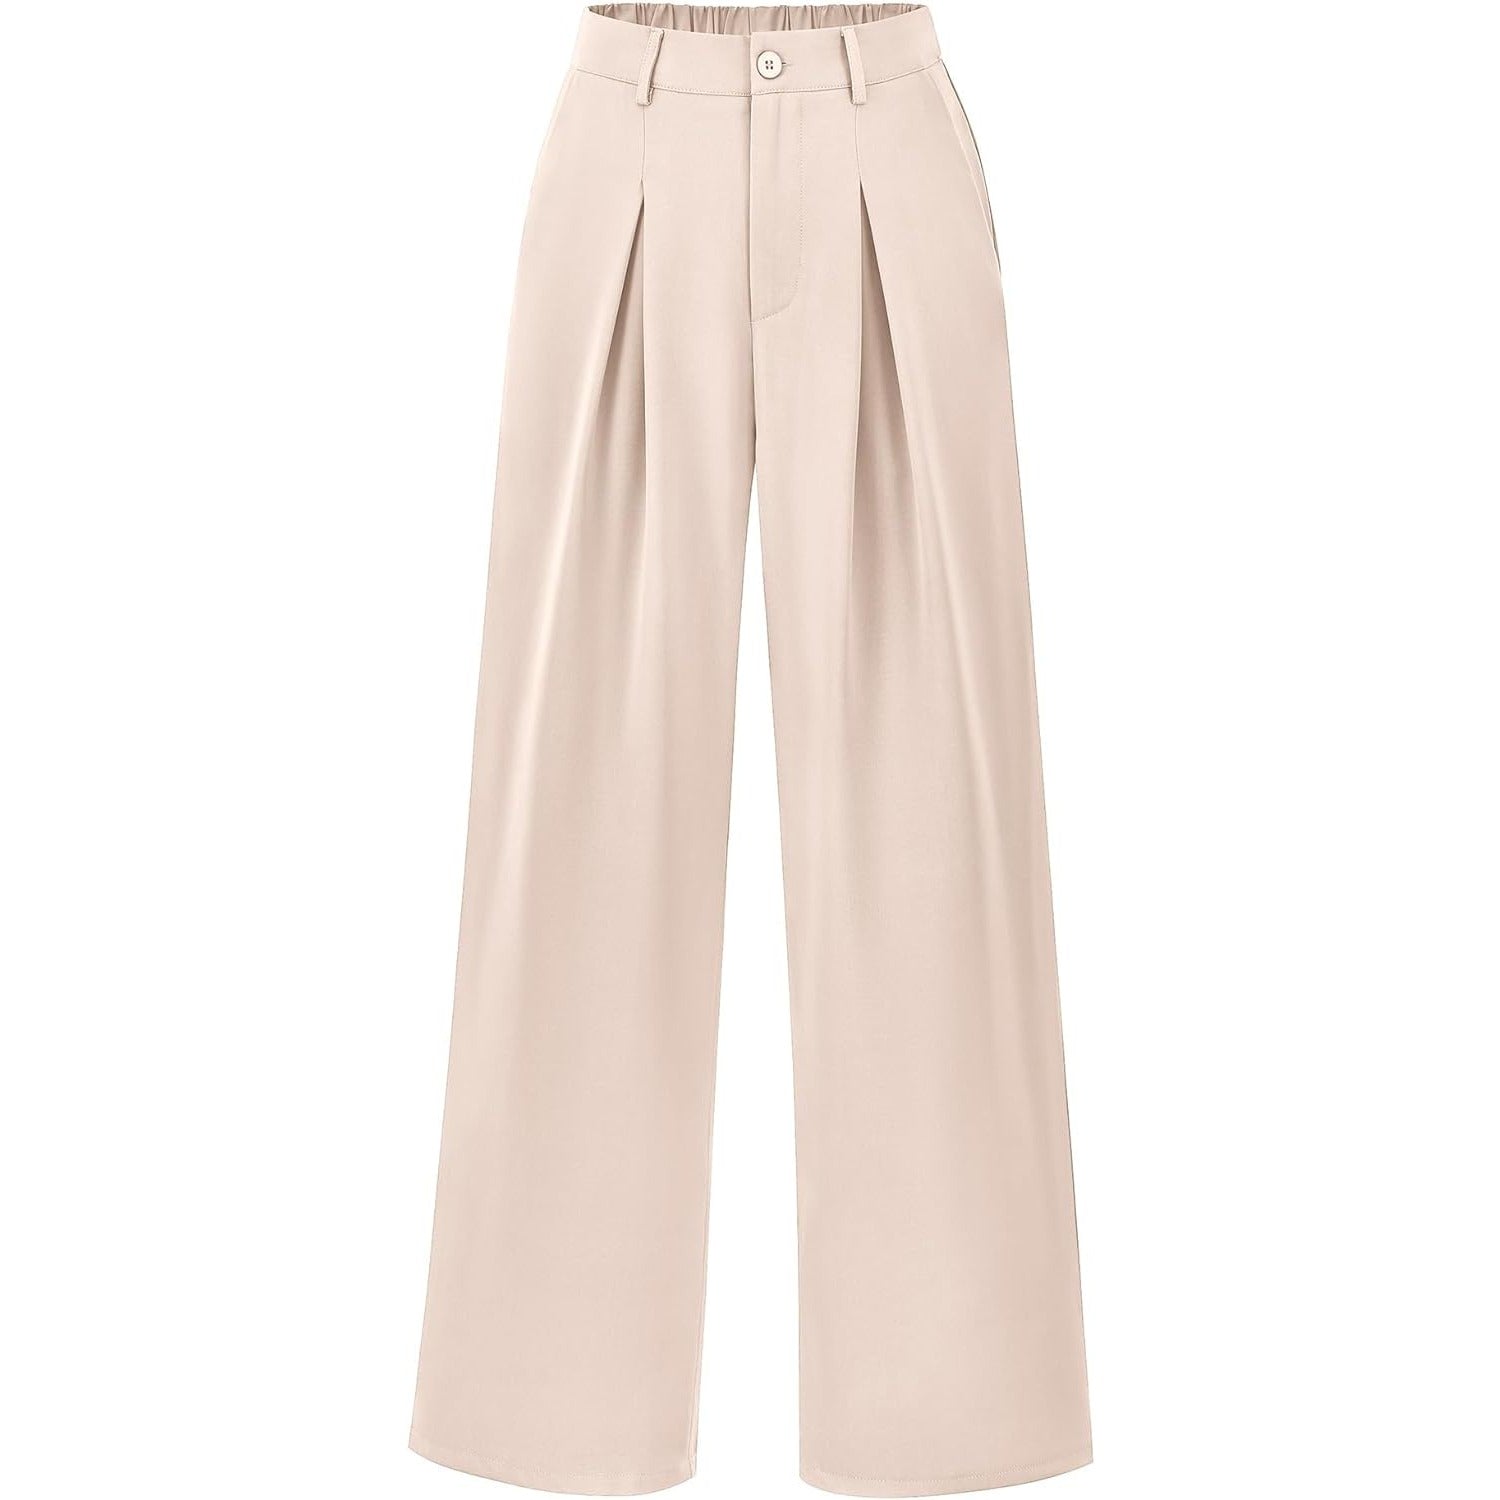 Women High Waist Casual Wide Leg Long Palazzo Pants Button Down Loose Business Work Office Trousers with Pockets